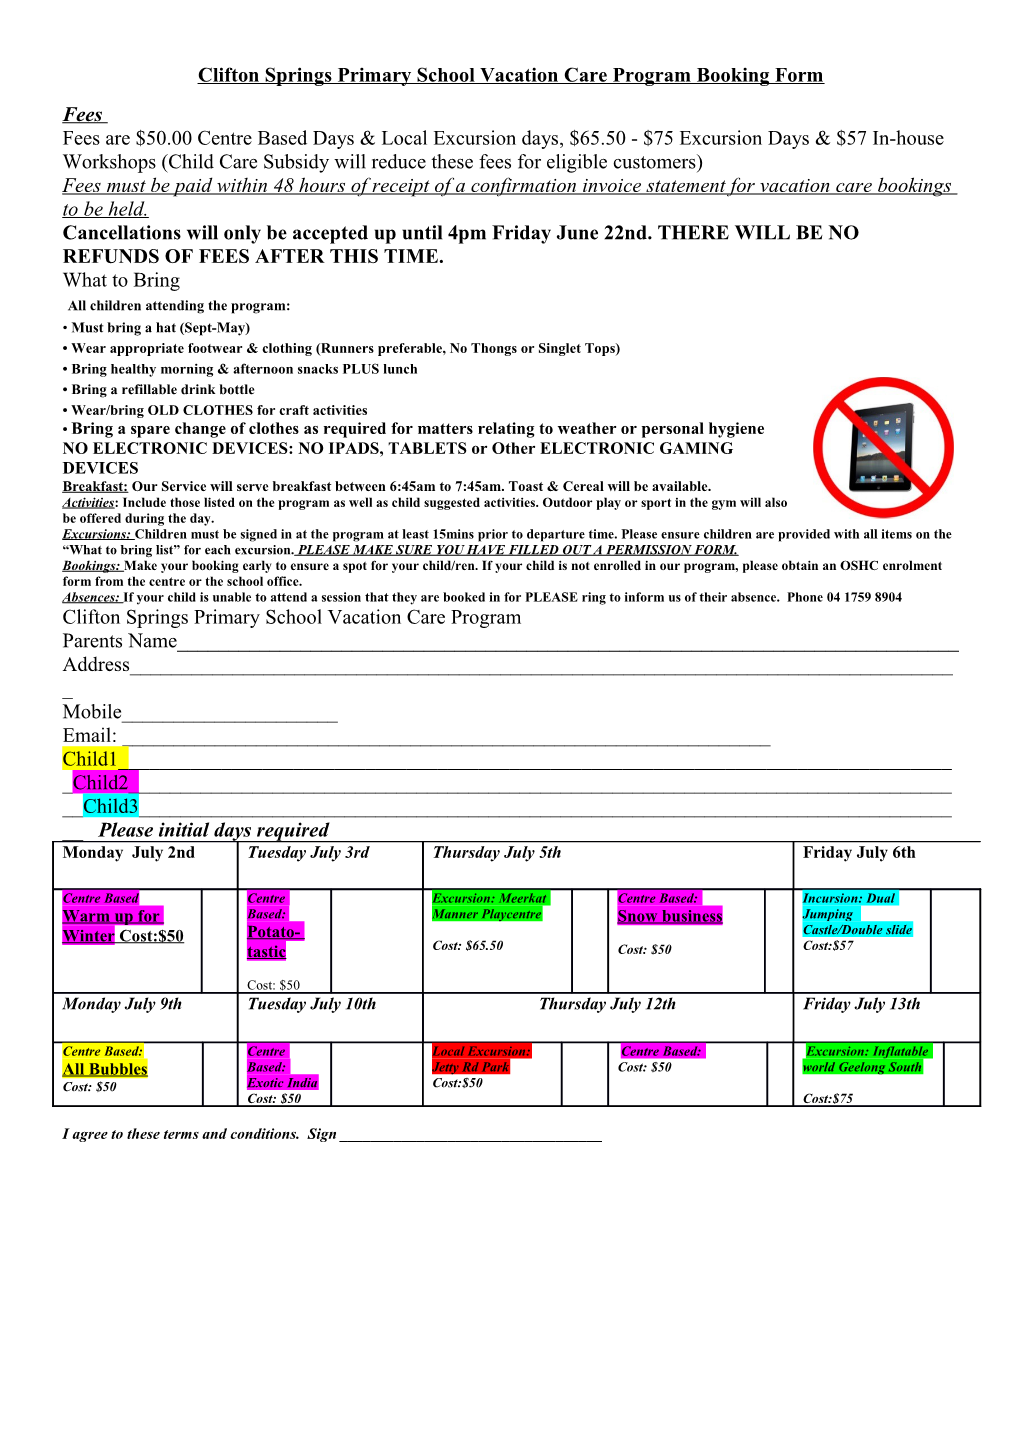 Clifton Springs Primary School Vacation Care Program Booking Form